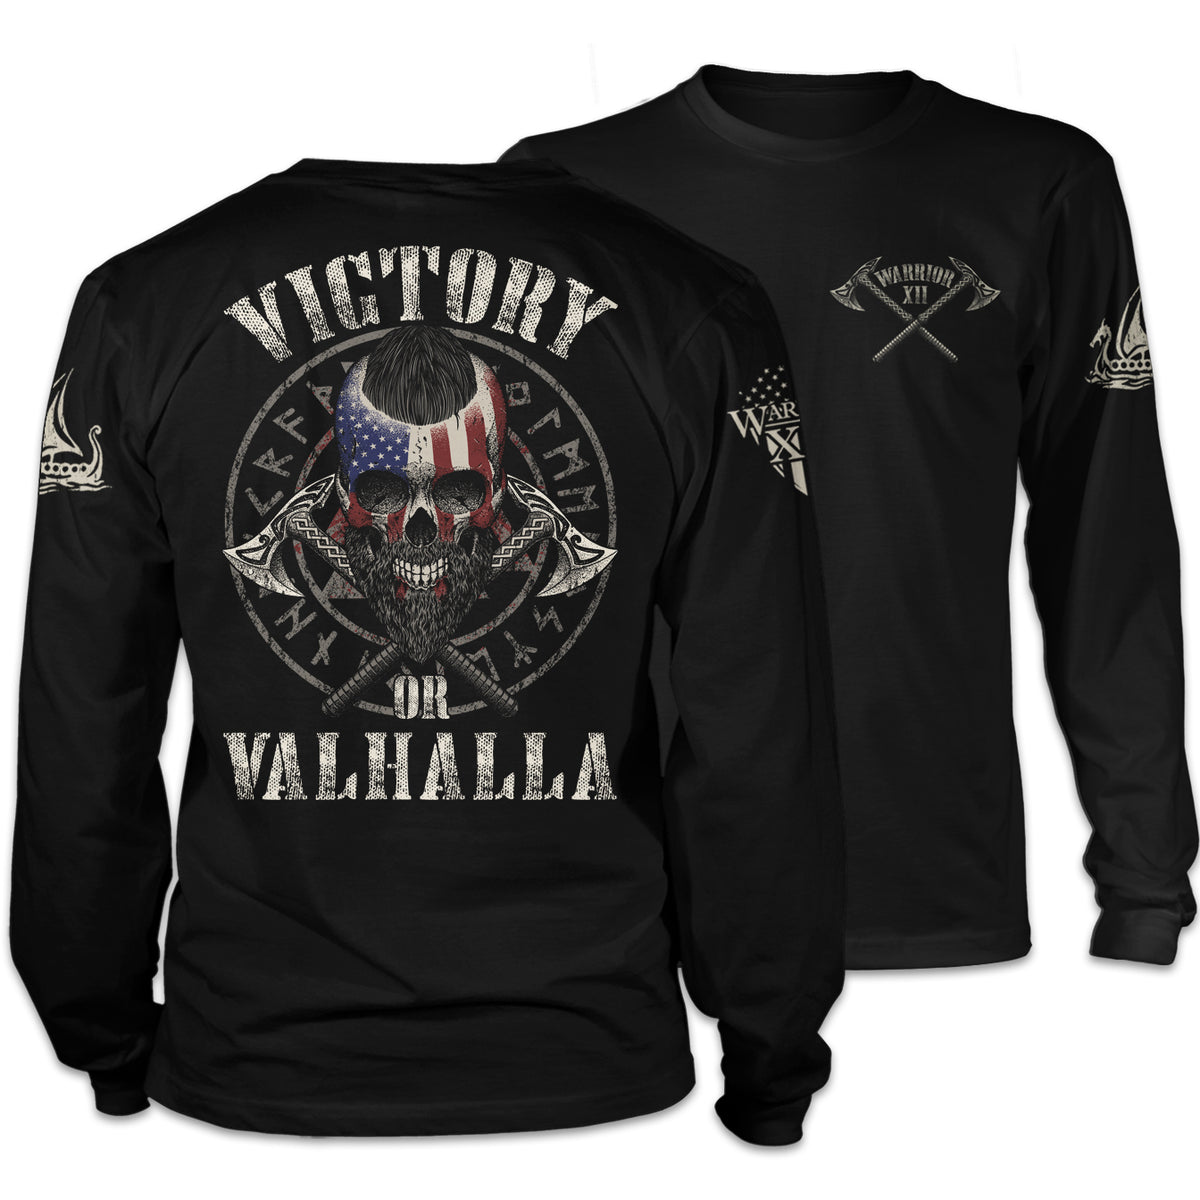 A black American Viking long sleeve t-shirt with the words "Warrior 12" and two axes printed on the front of the shirt.